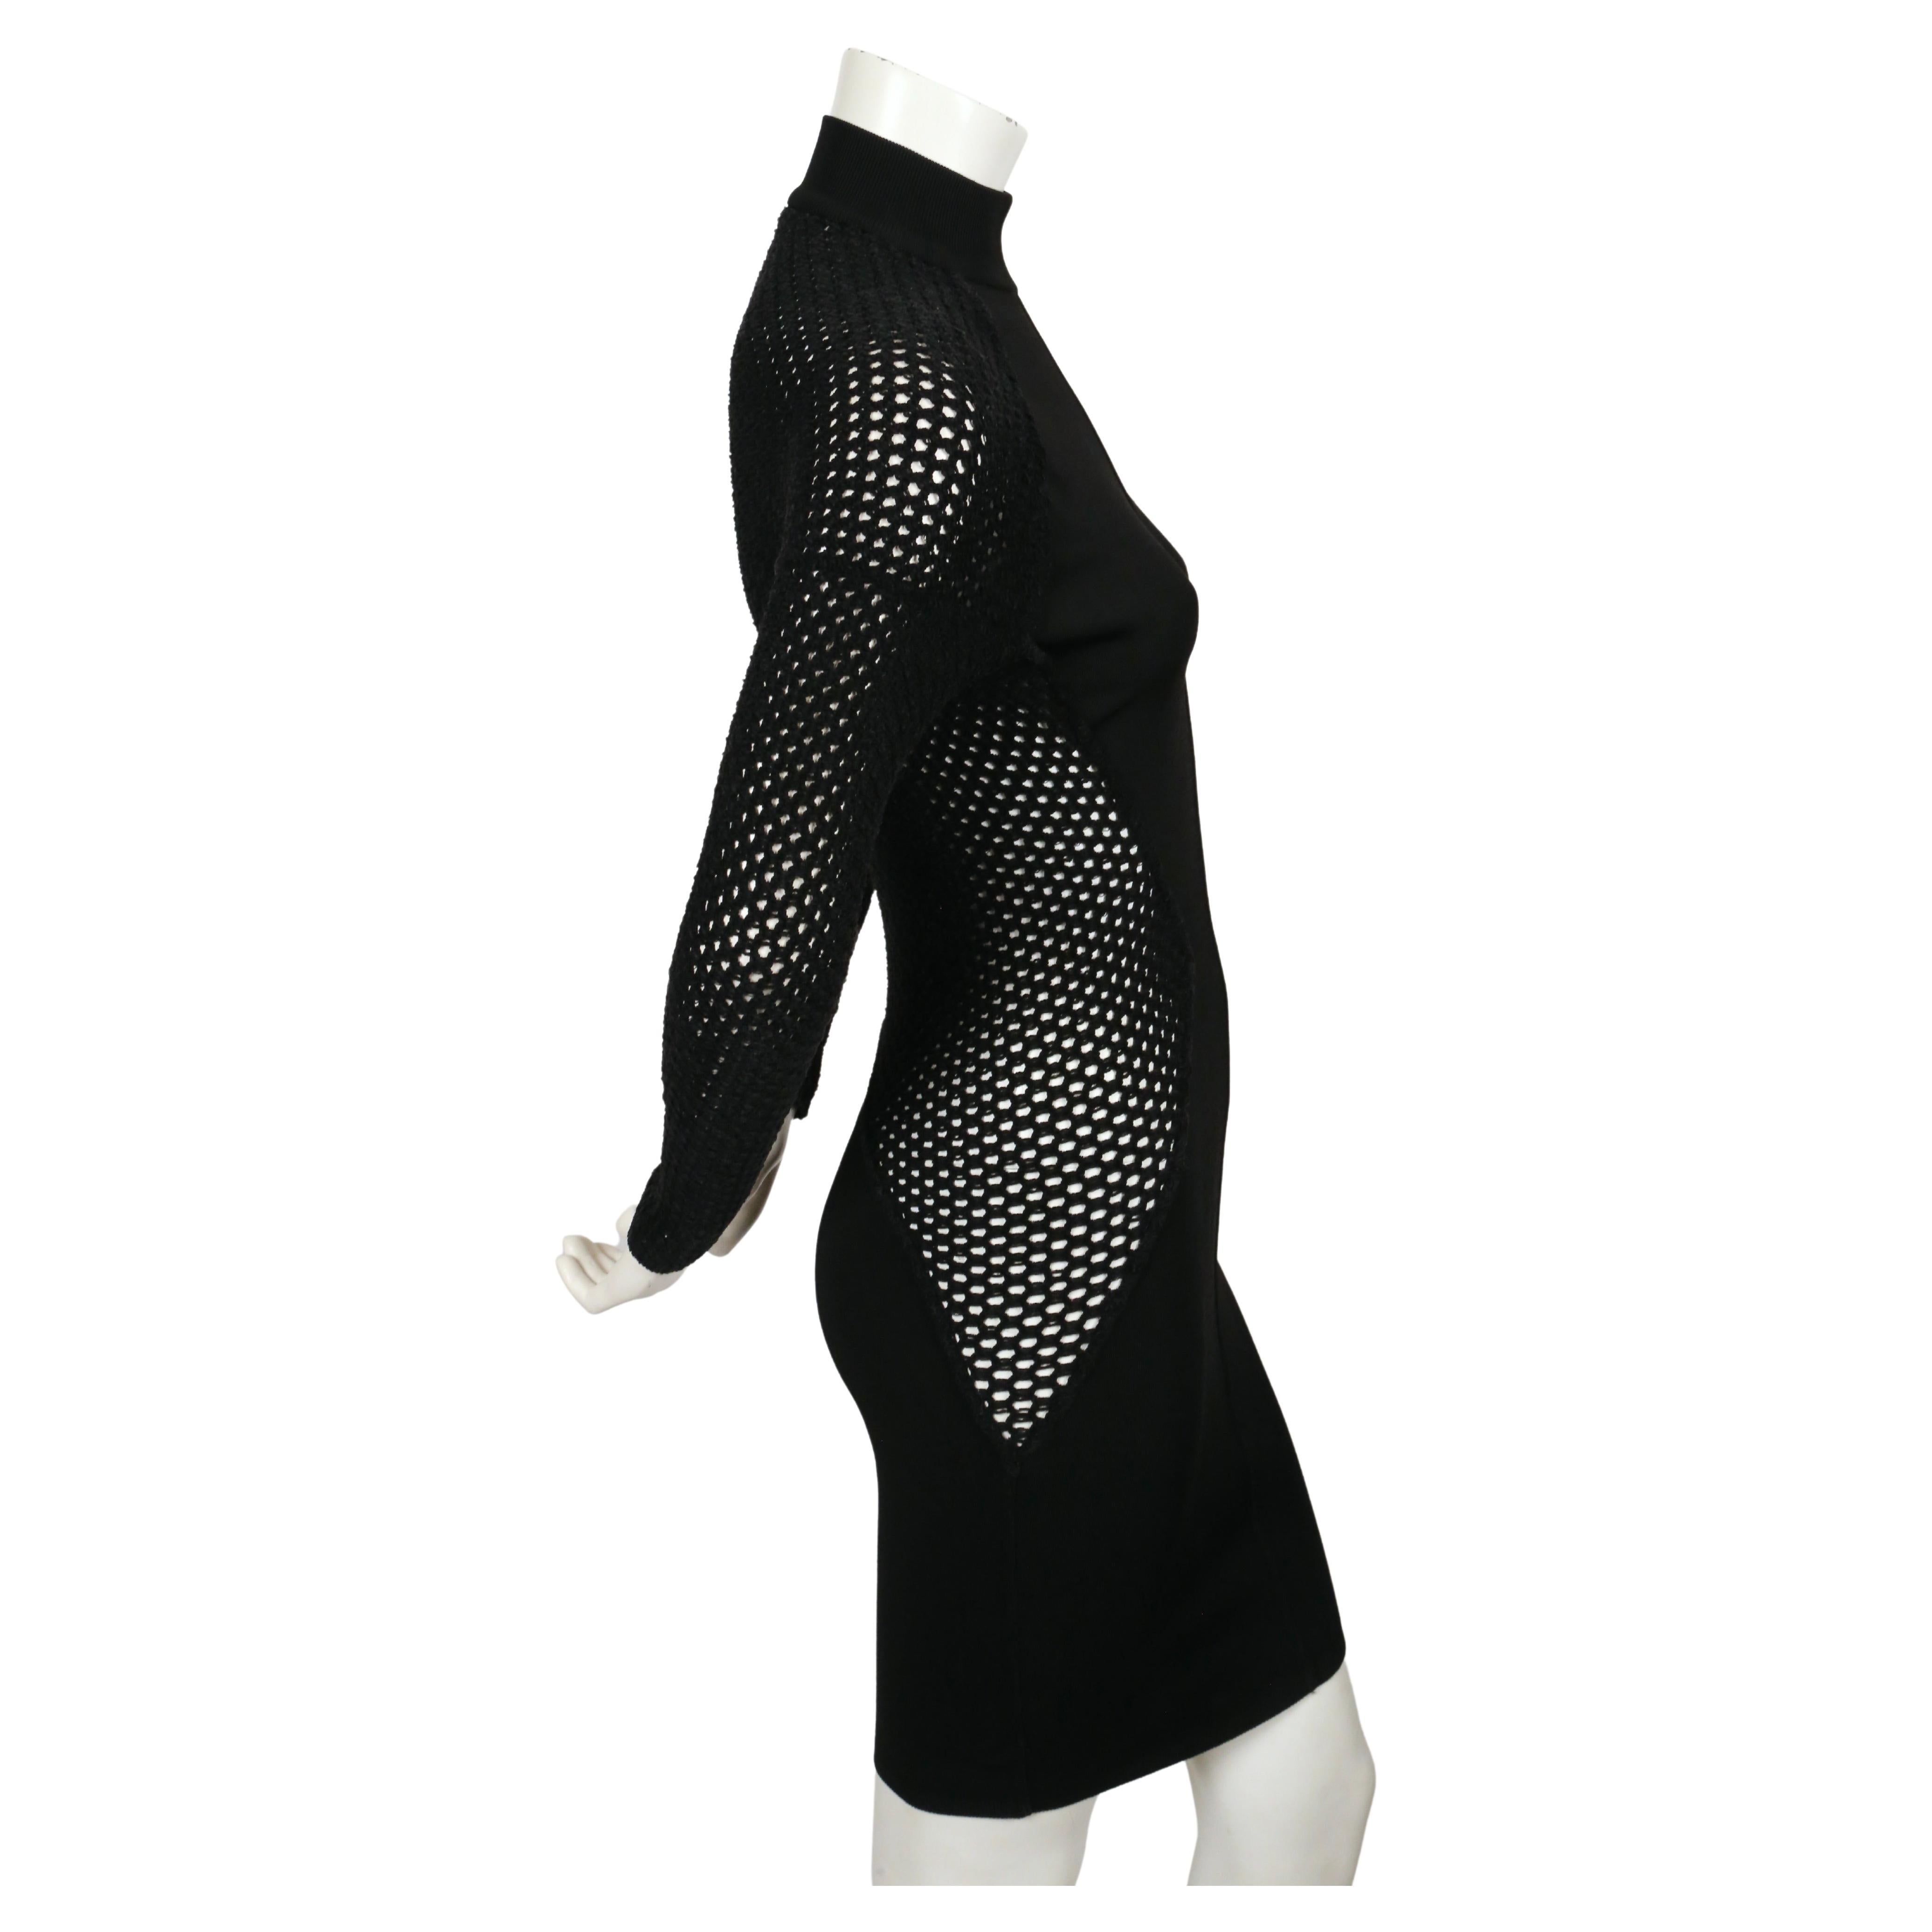 1989 AZZEDINE ALAIA black RUNWAY dress with sheer chenille panels For Sale 1